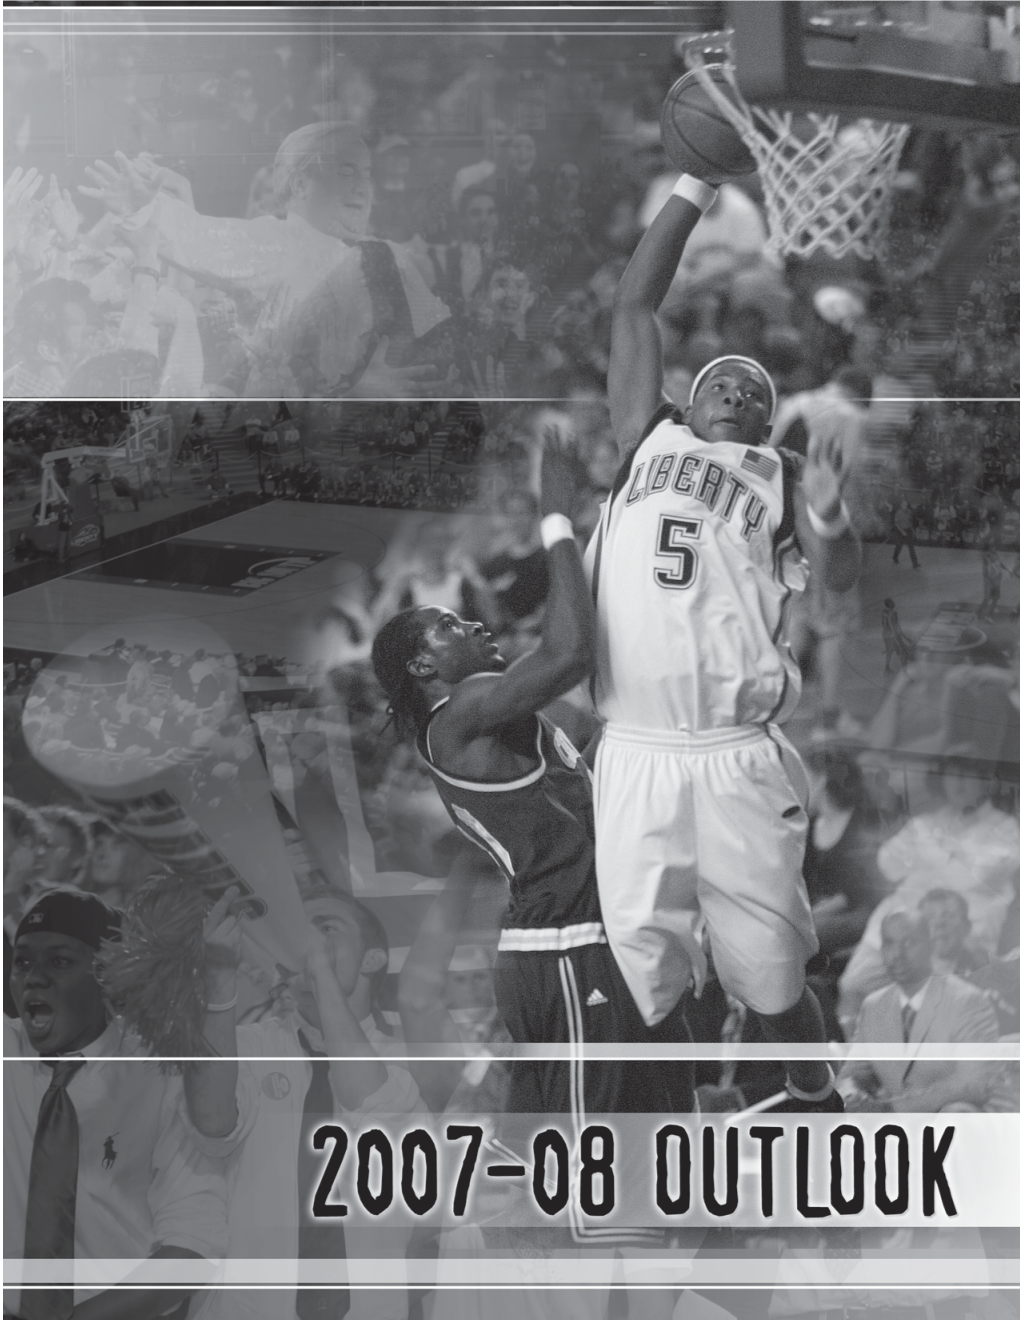 2007-08 Outlook (Pages 35-38).Pdf